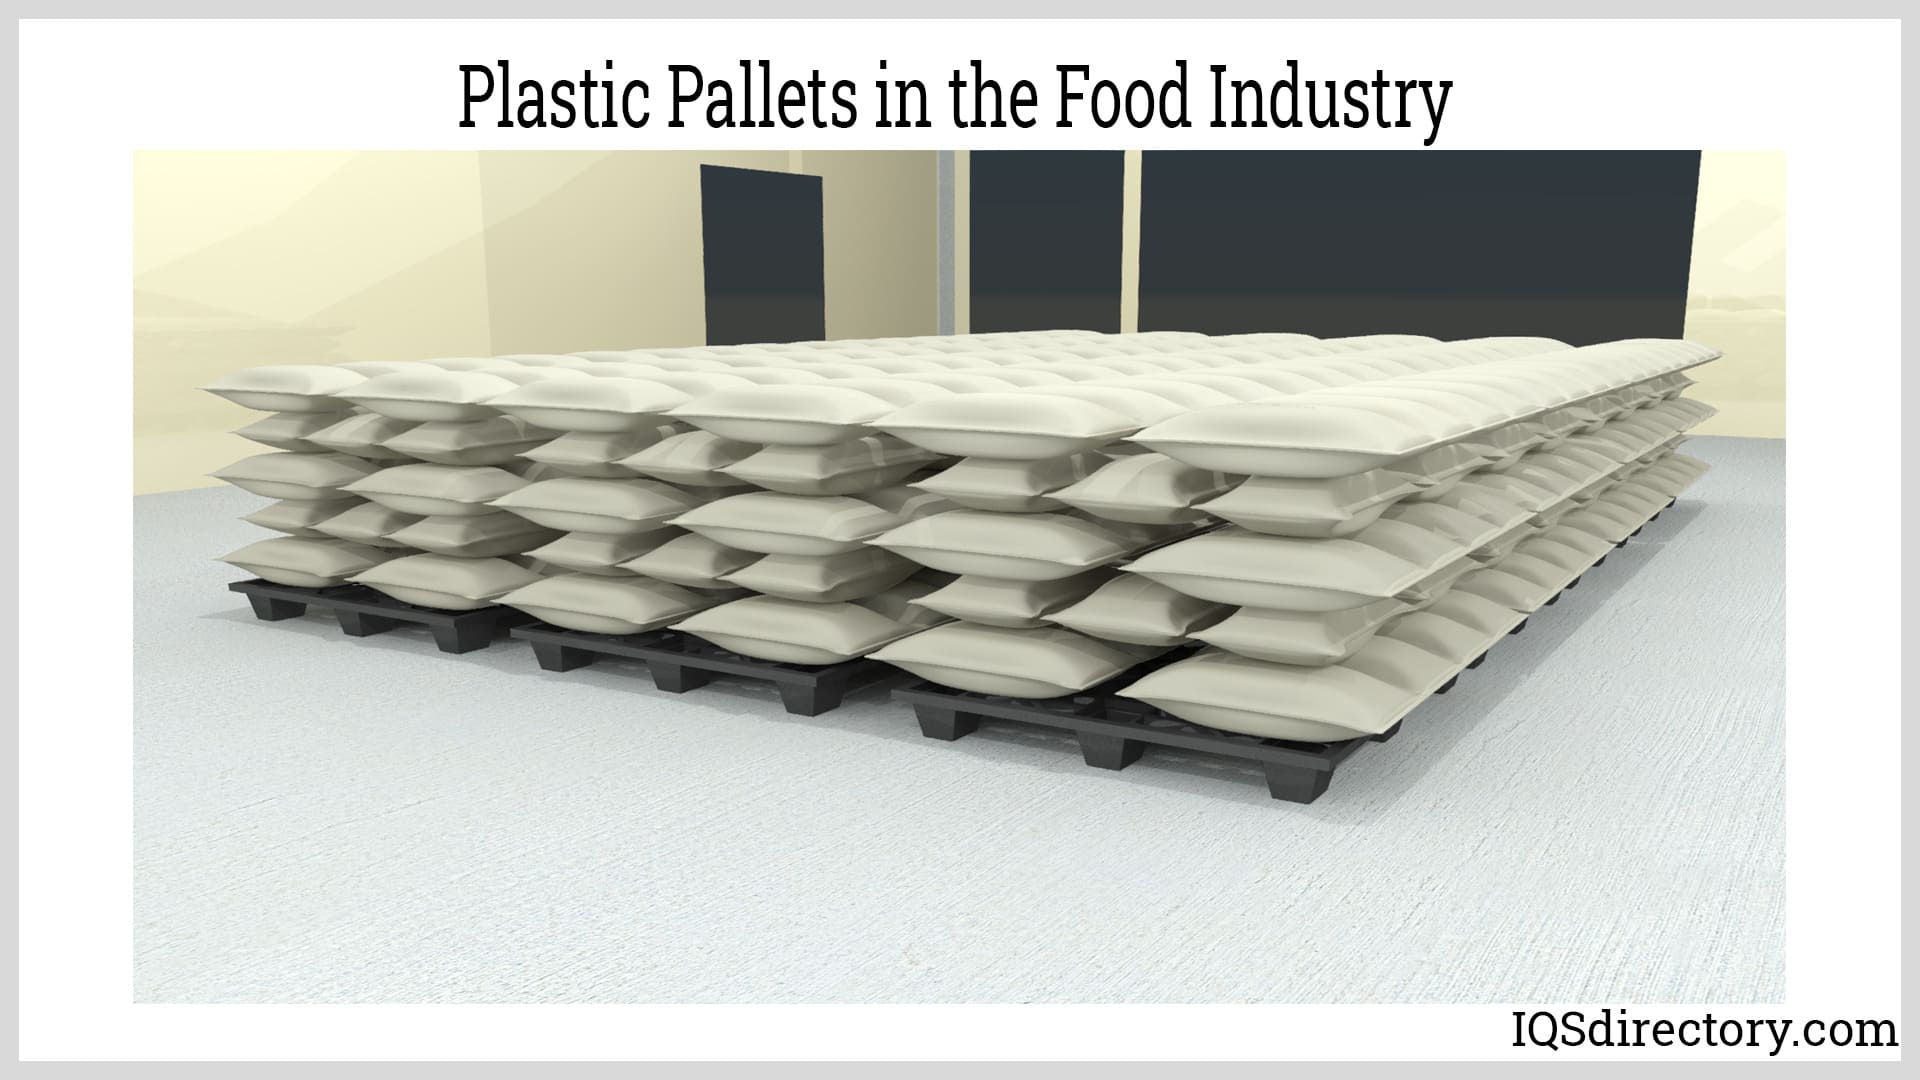 Plastic Pallets in the Food Industry